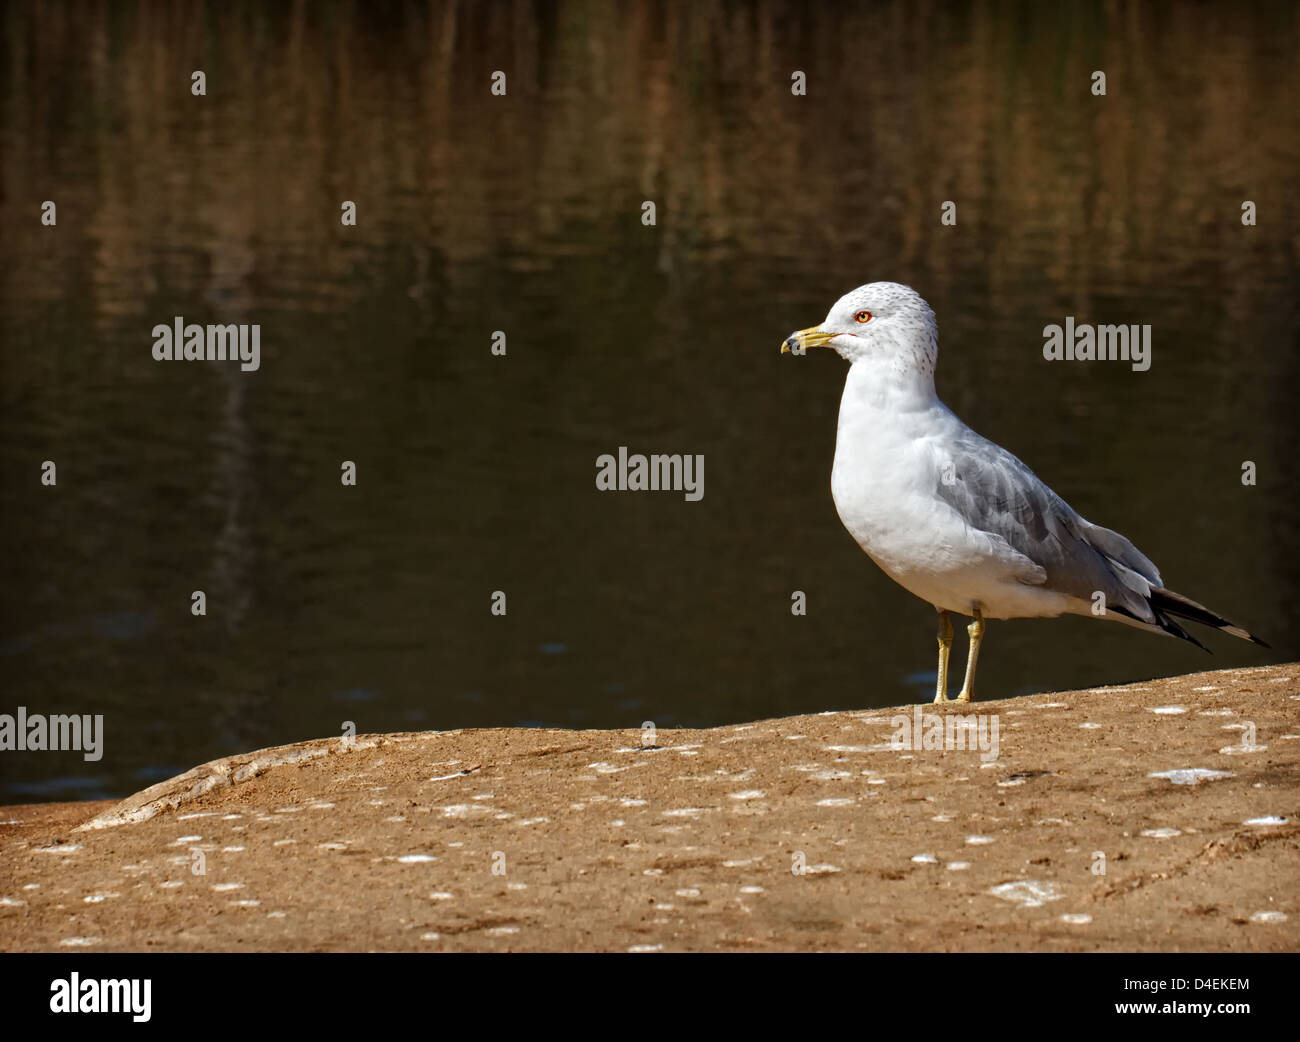 A California seagull, standing on shore, next to a pond. Stock Photo